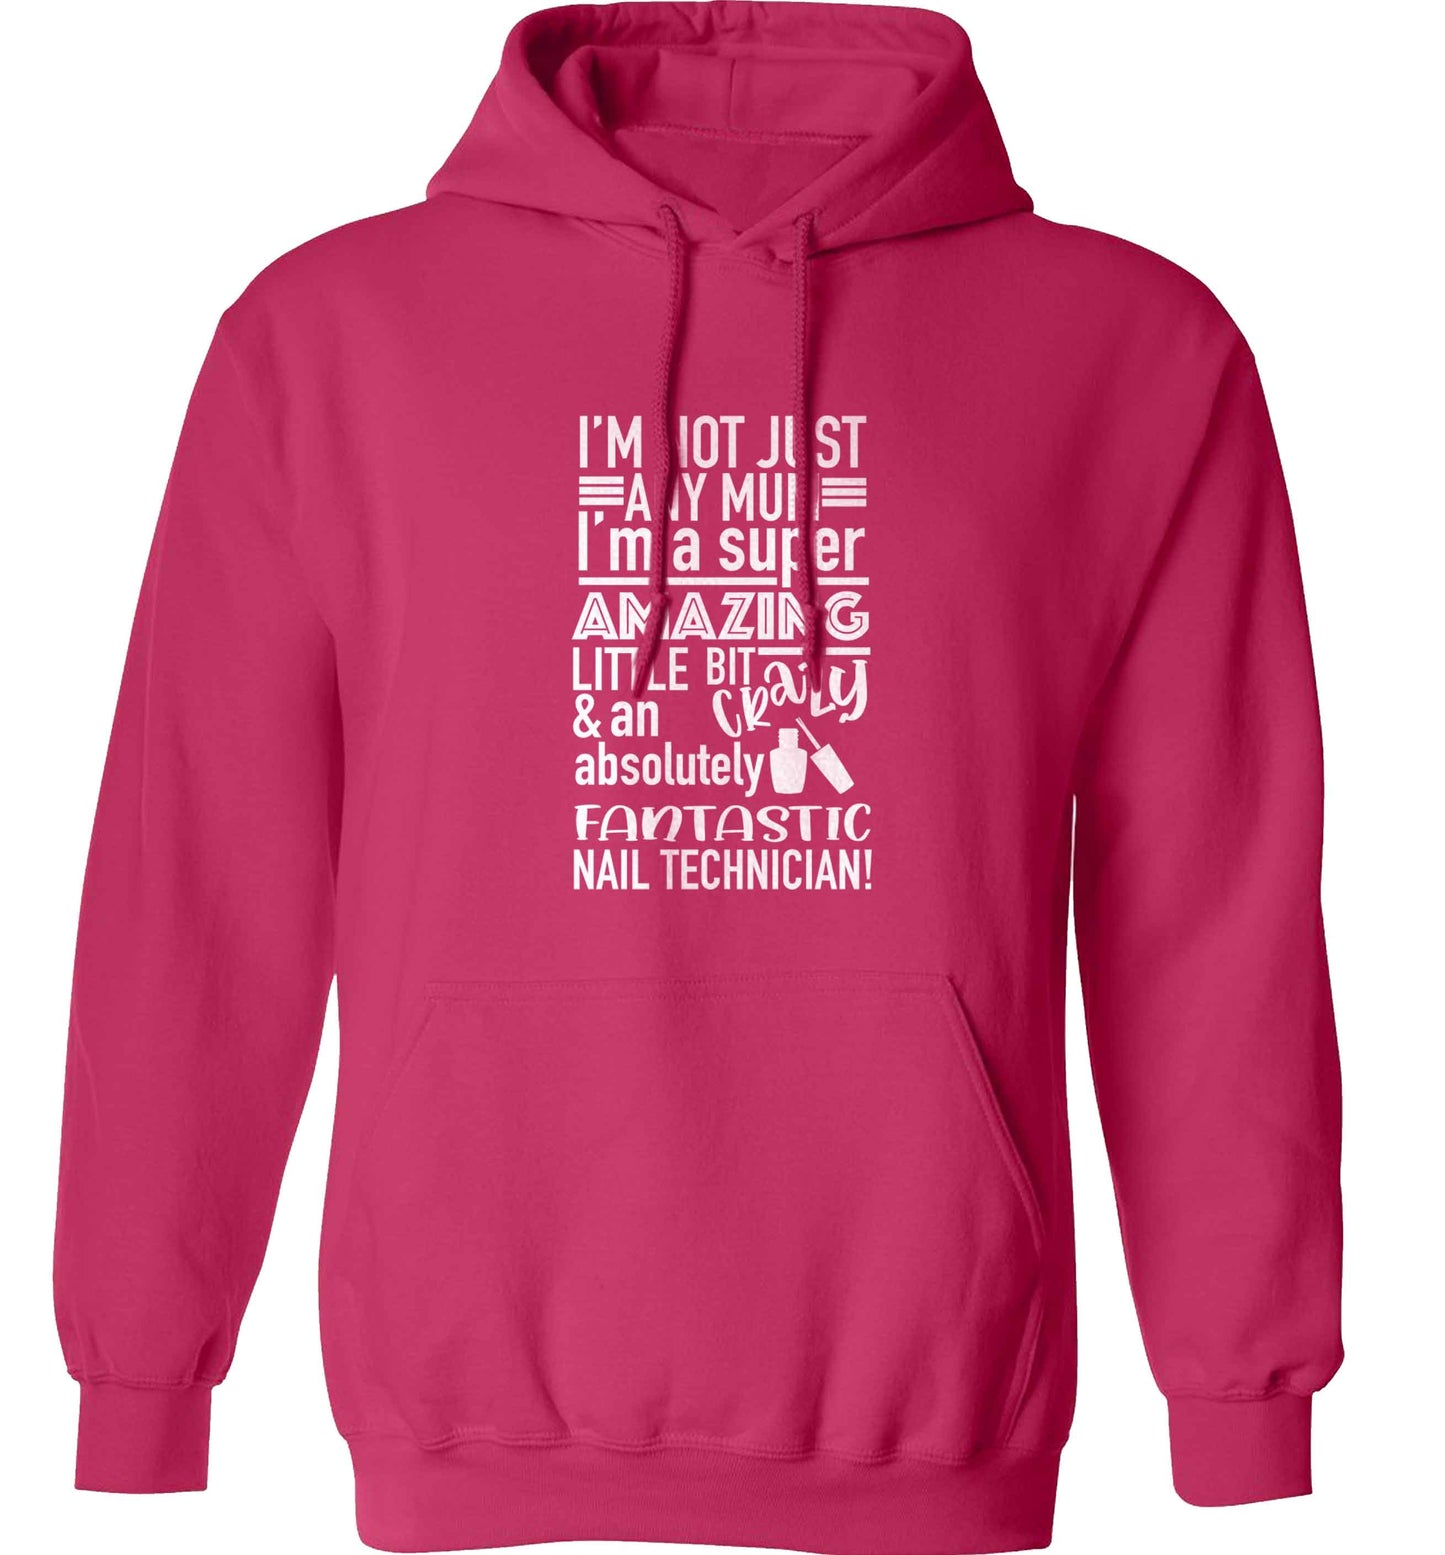 I'm not just any mum I'm a super amazing little bit crazy and an absolutely fantastic nail technician! adults unisex pink hoodie 2XL